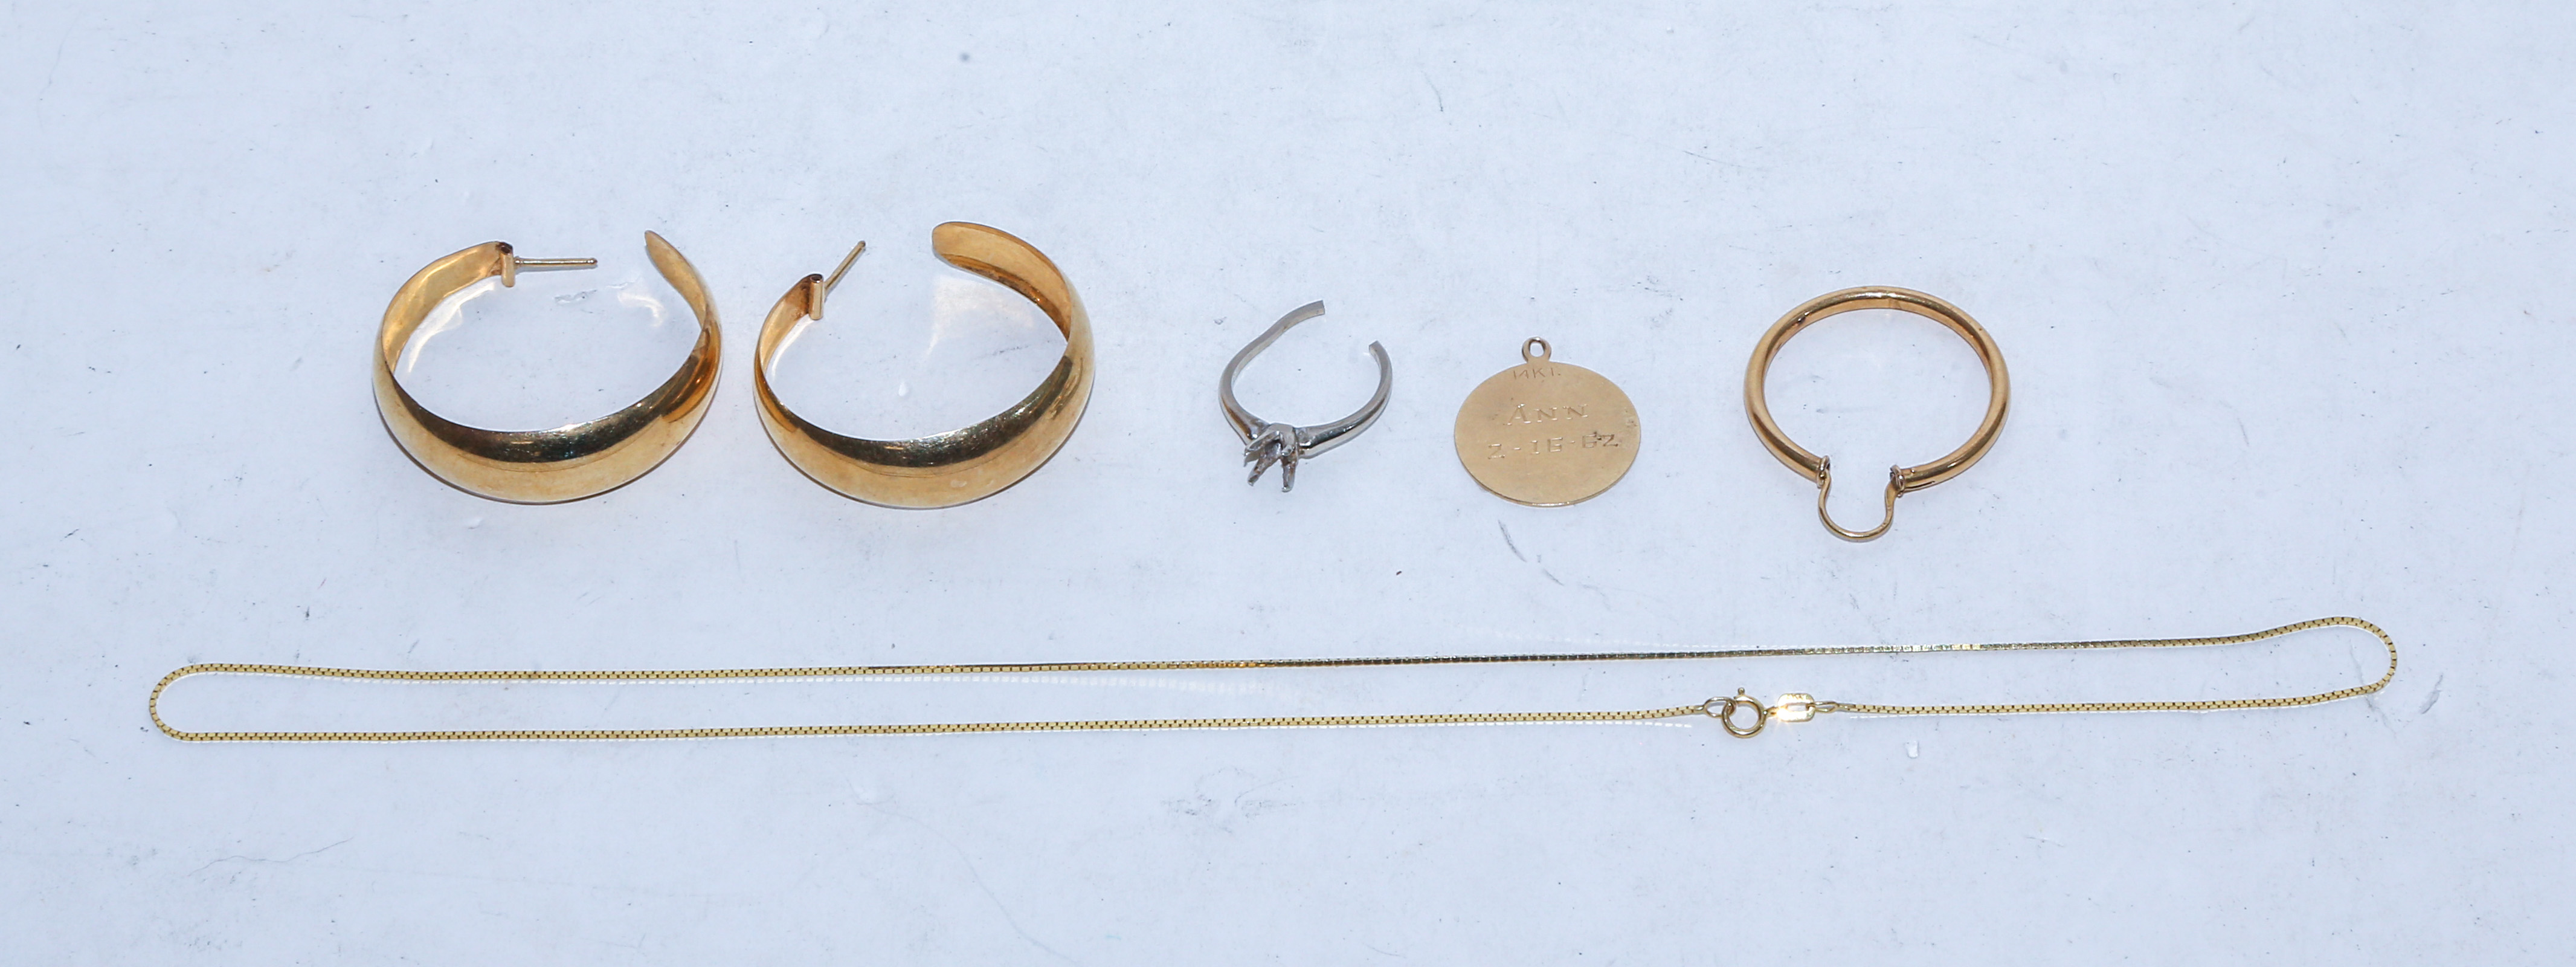 A PAIR OF GOLD HOOPS, NECKLACE